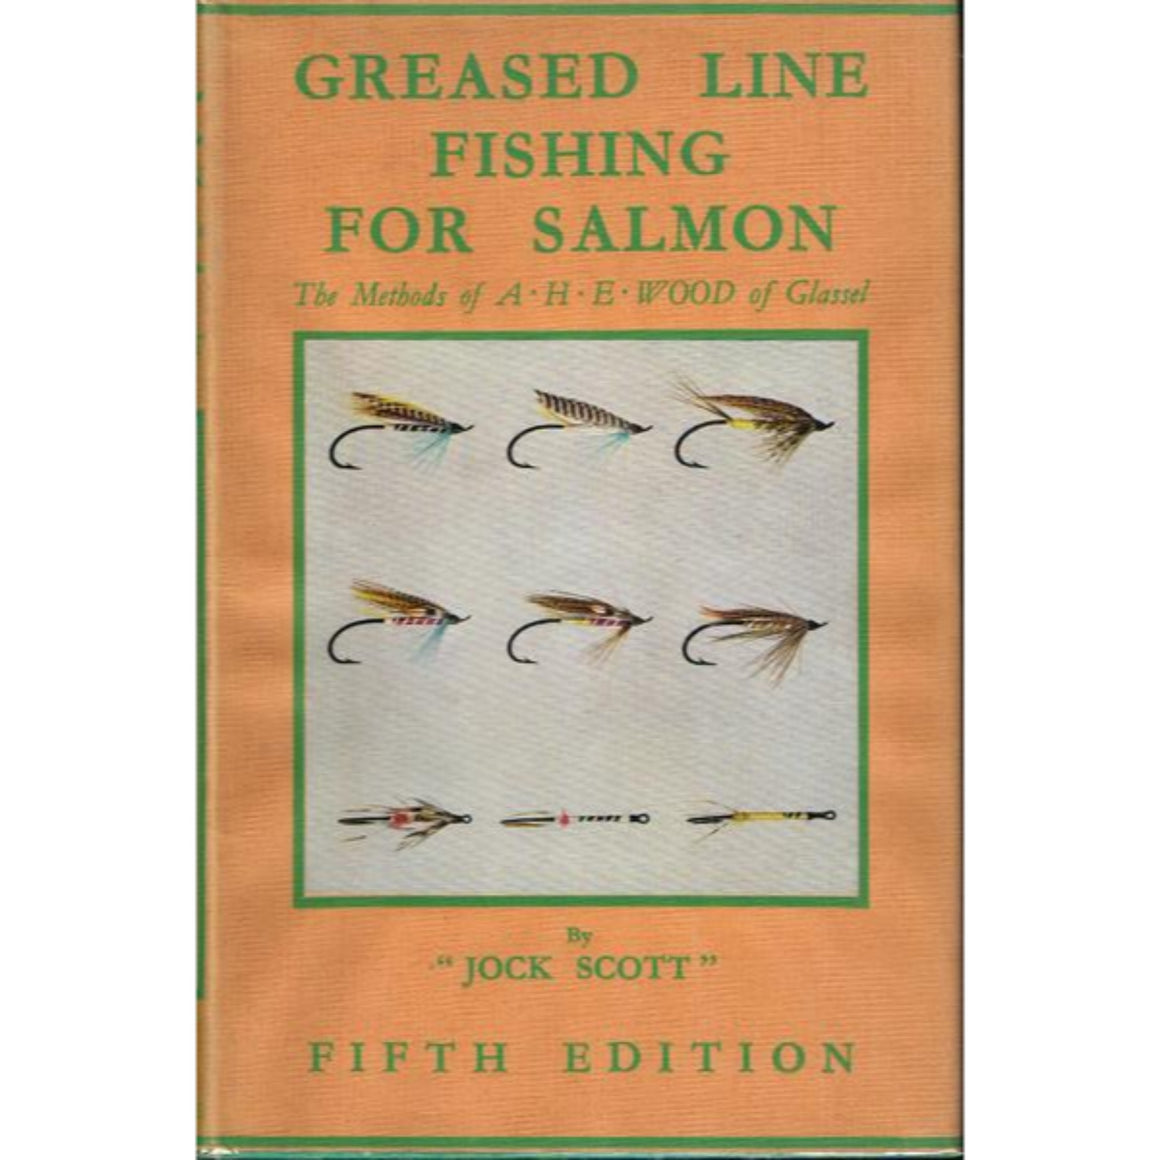 Greased Line Fishing For Salmon